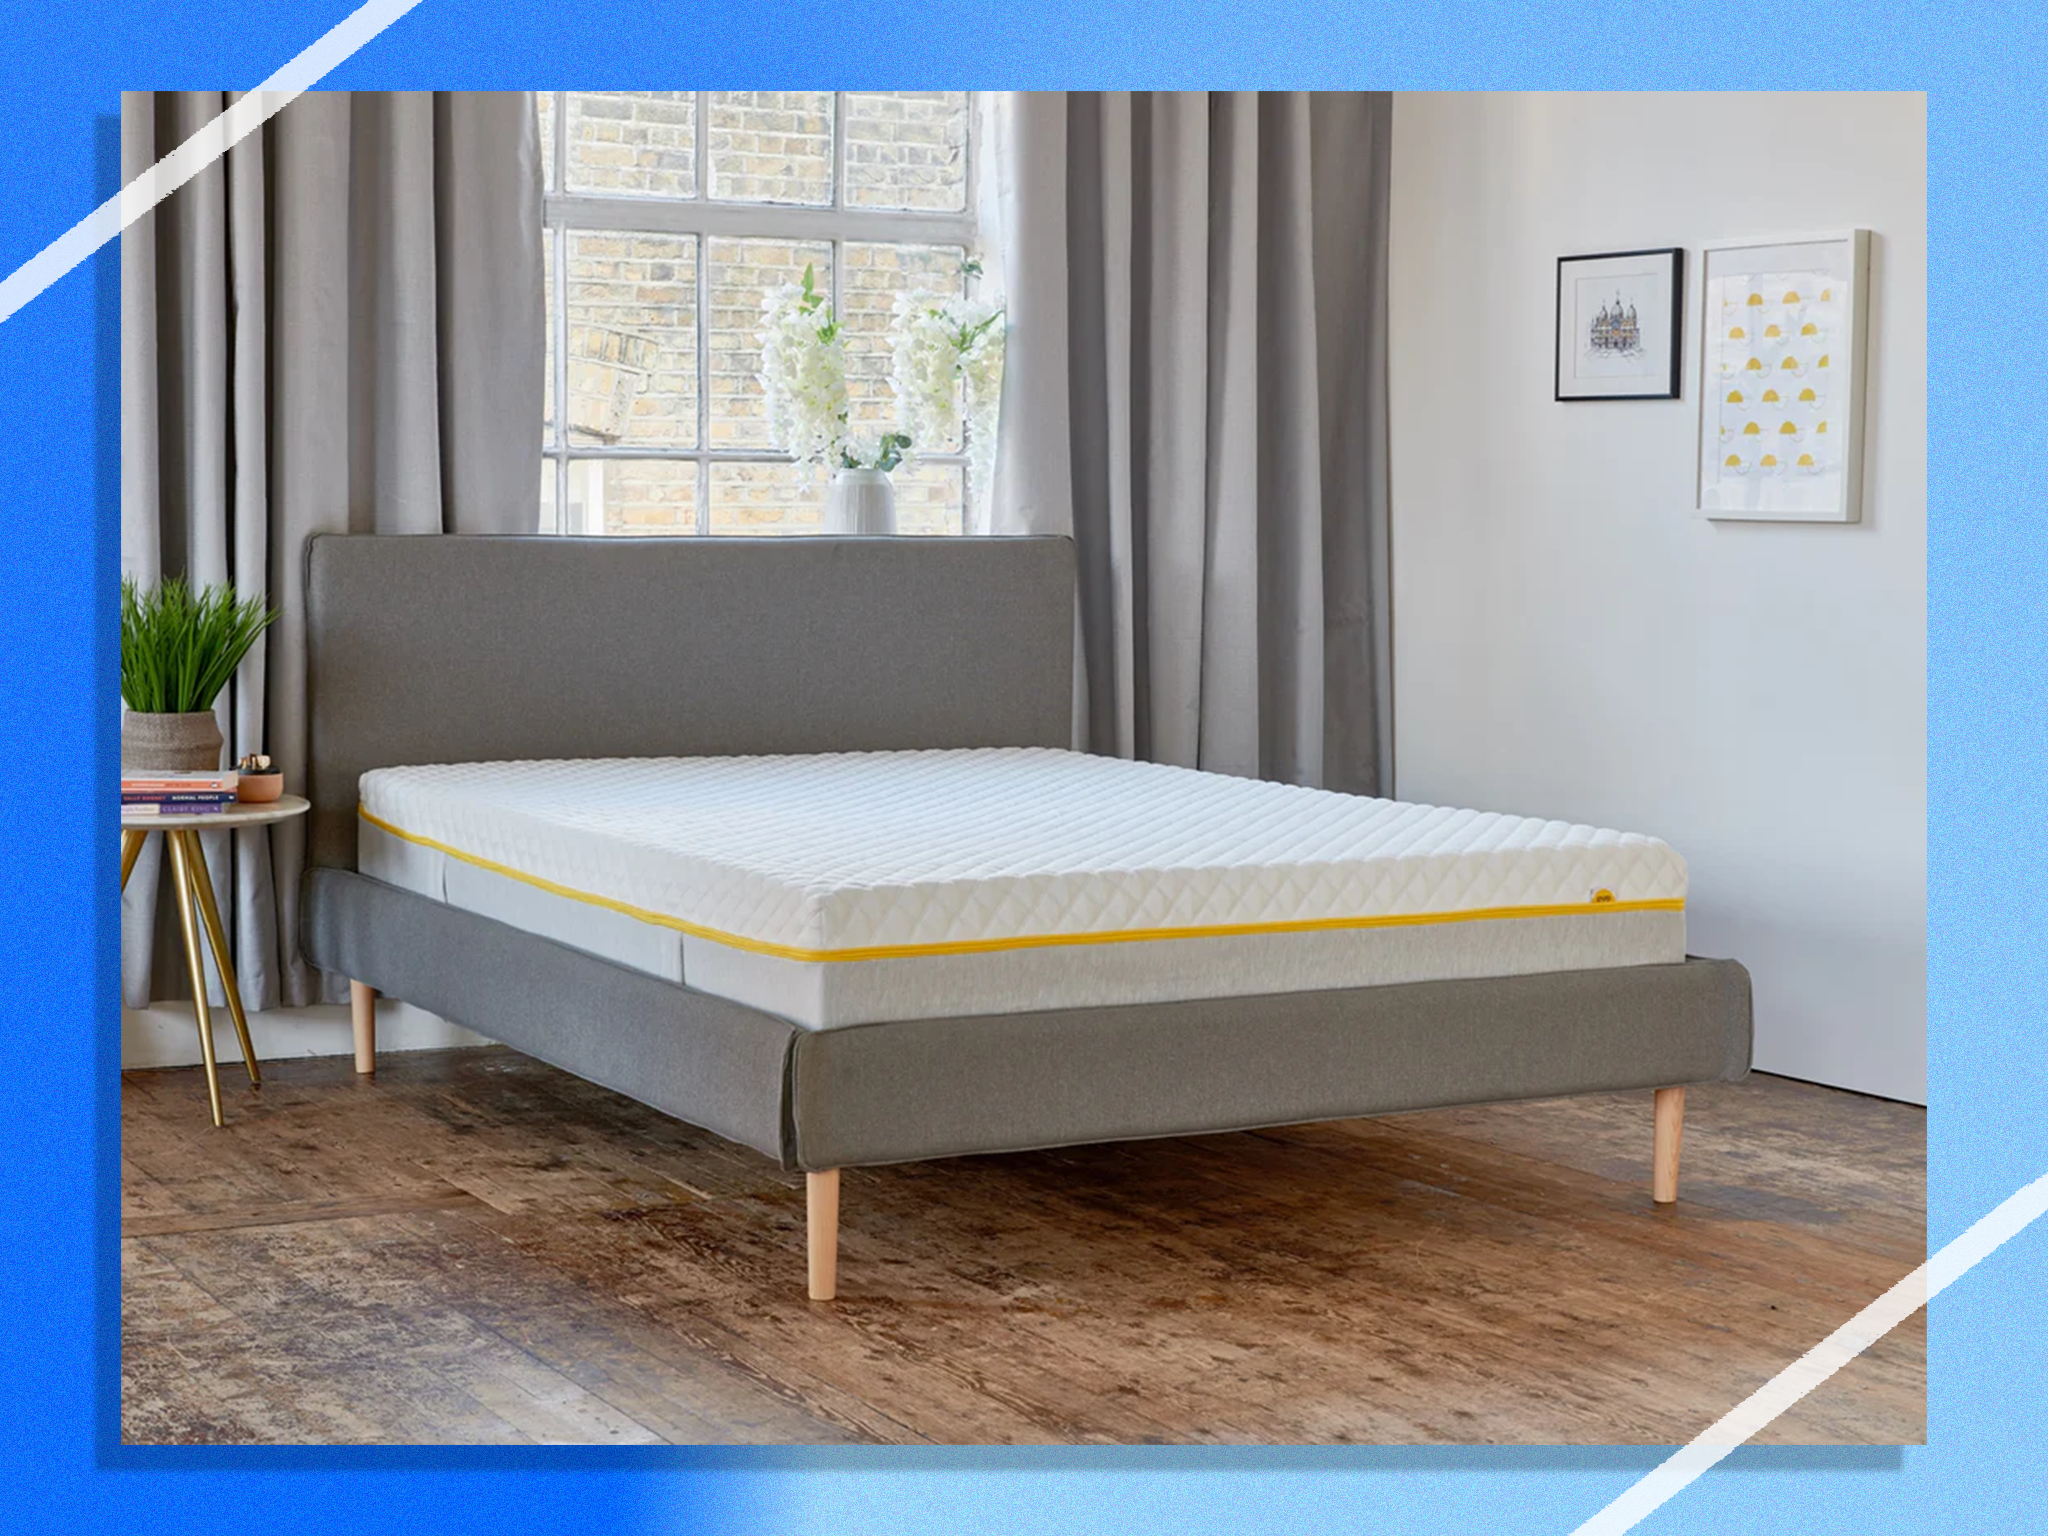 It claims to be a dream for back, side or front sleepers – does the medium-firm mattress deliver?